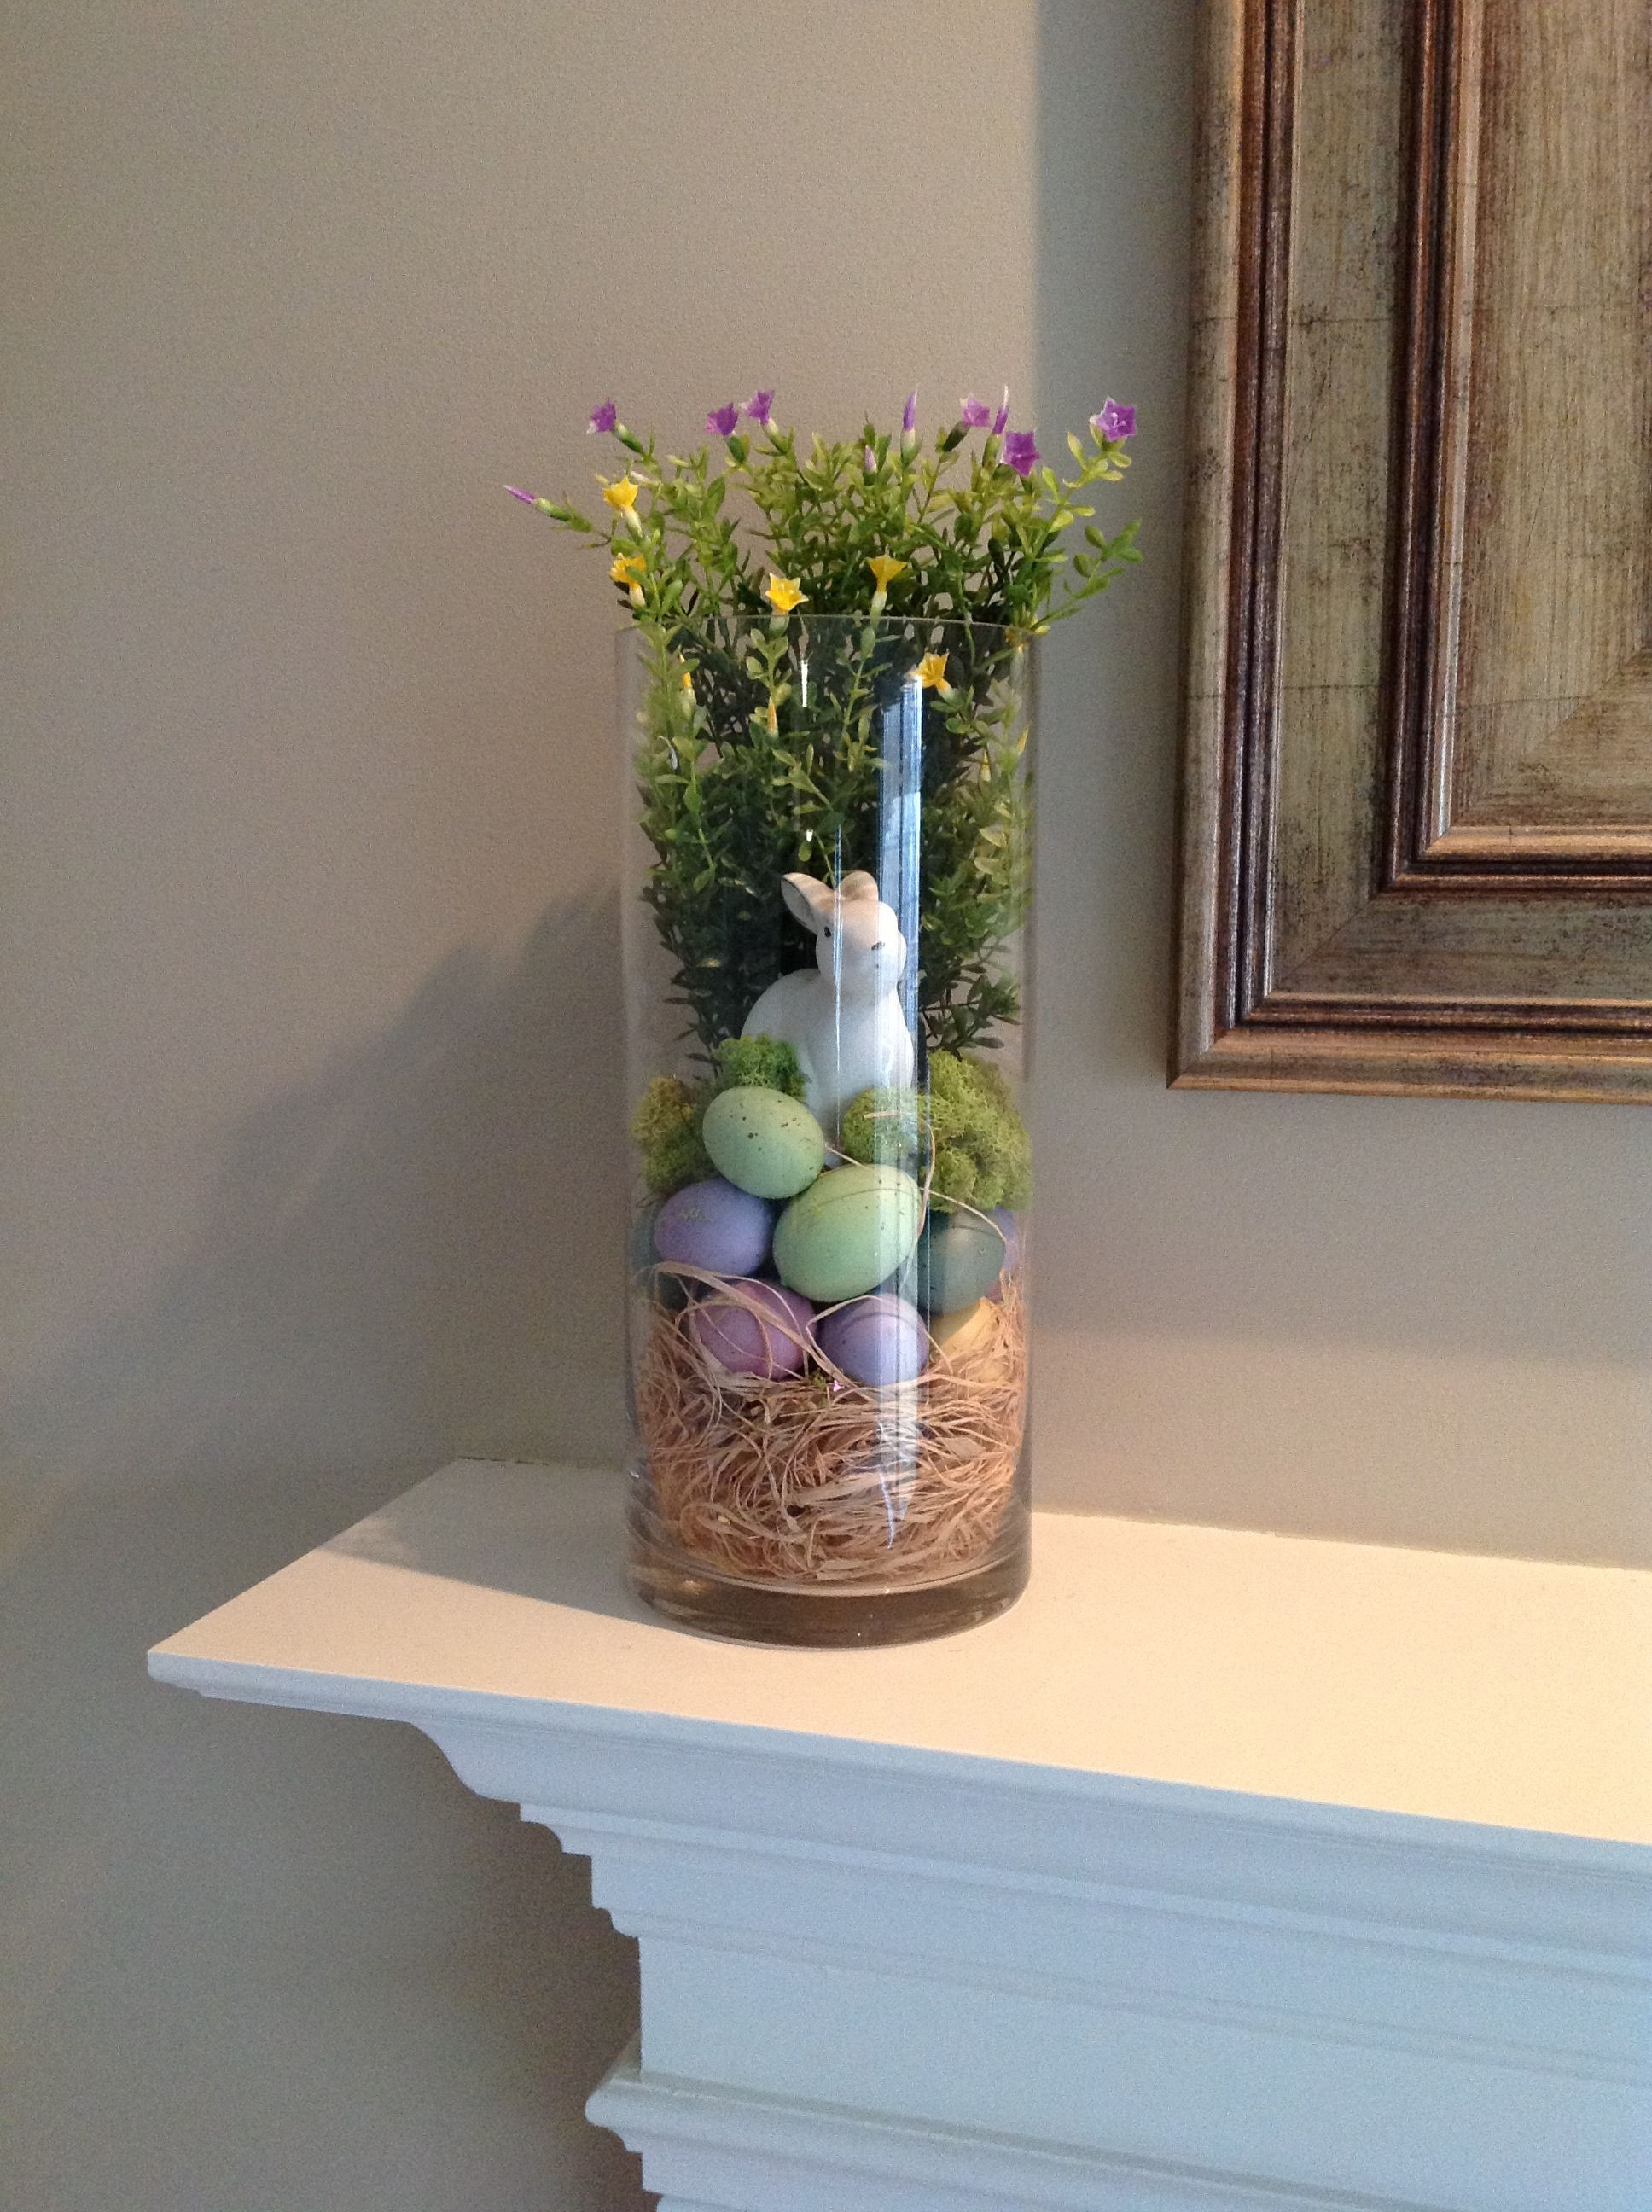 25 Nice Yellow Vase Filler Ideas 2024 free download yellow vase filler ideas of hurricane glass vase filler for spring and easter on the mantel with regard to hurricane glass vase filler for spring and easter on the mantel lori lubker pin eas